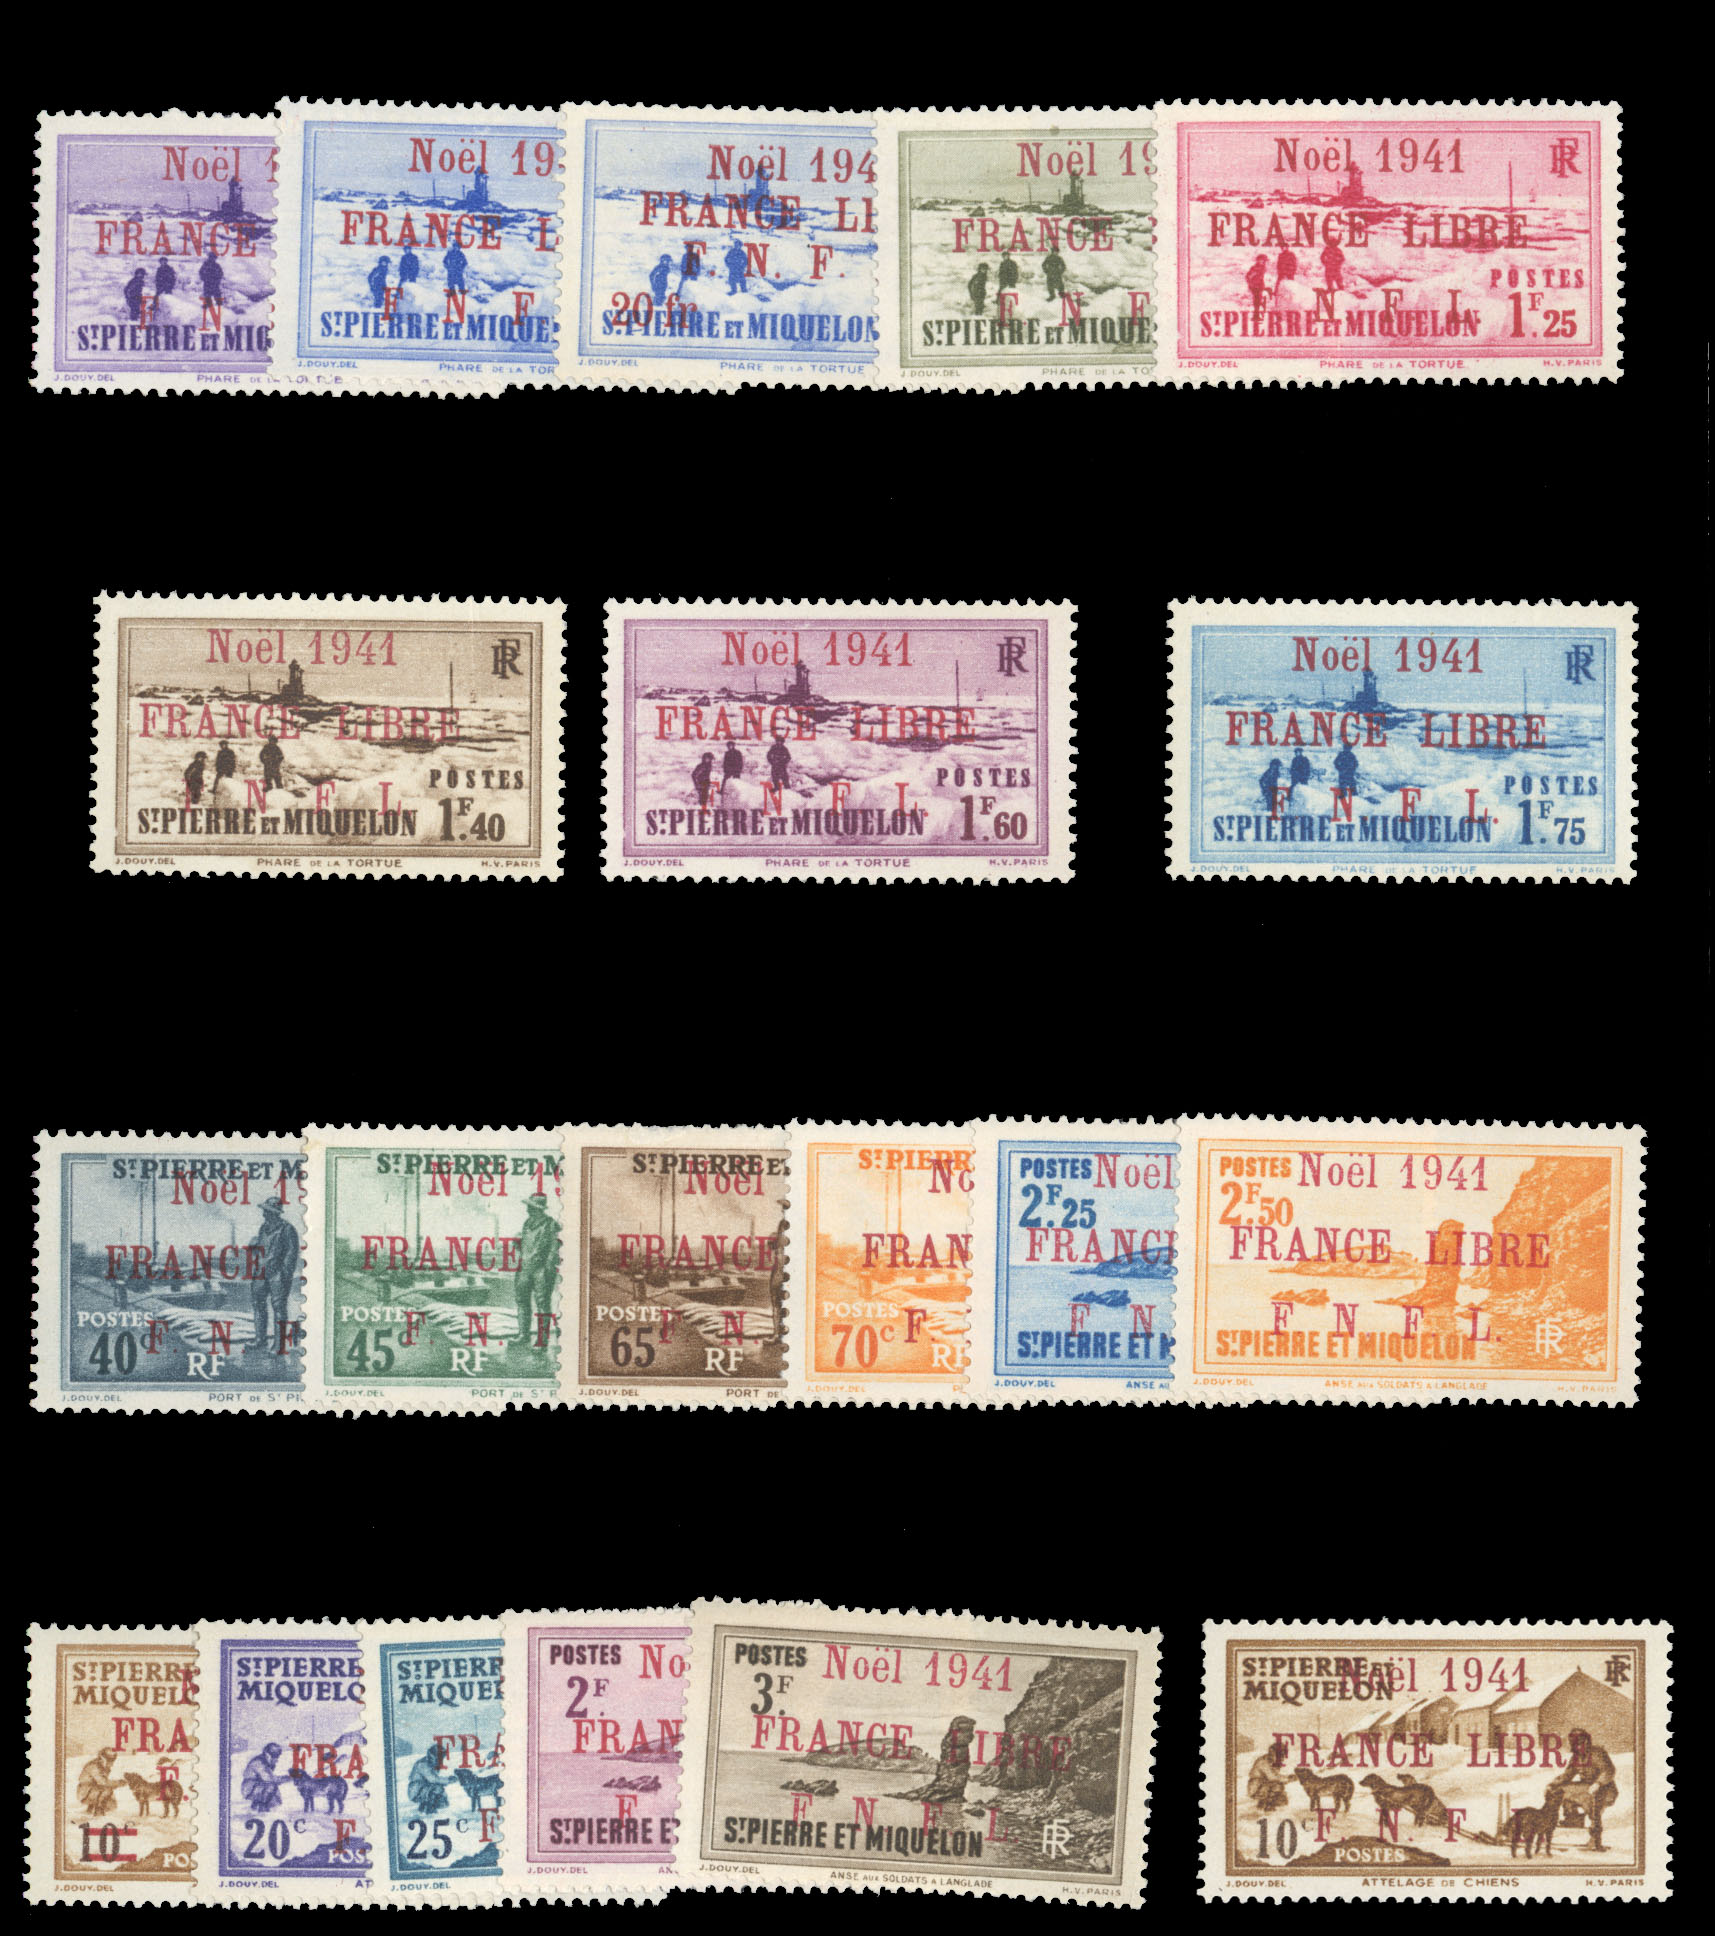 Lot 492 - FRENCH COLONIES Algeria  -  Cherrystone Auctions U.S. & Worldwide Stamps & Postal History